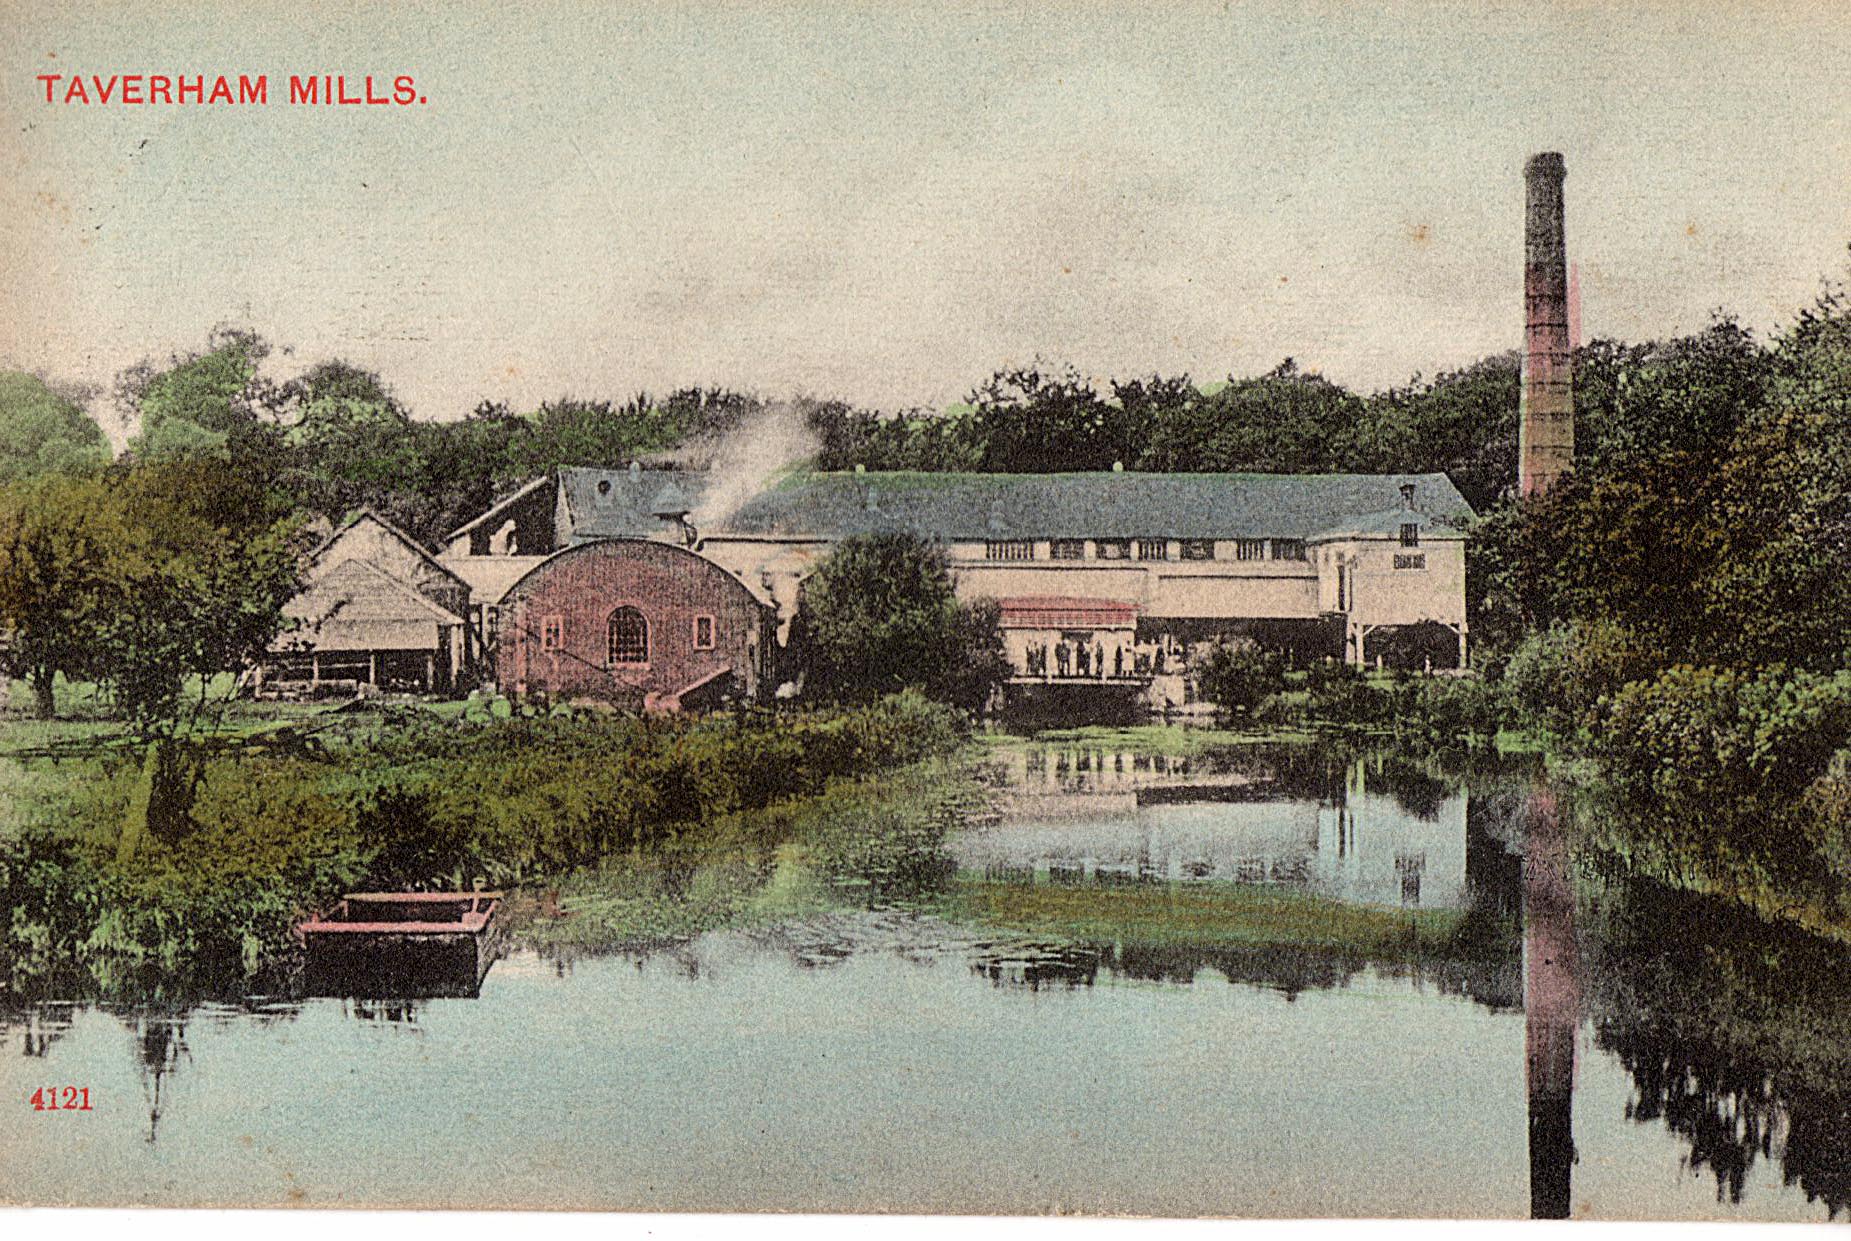 Dick hart and old mill pond